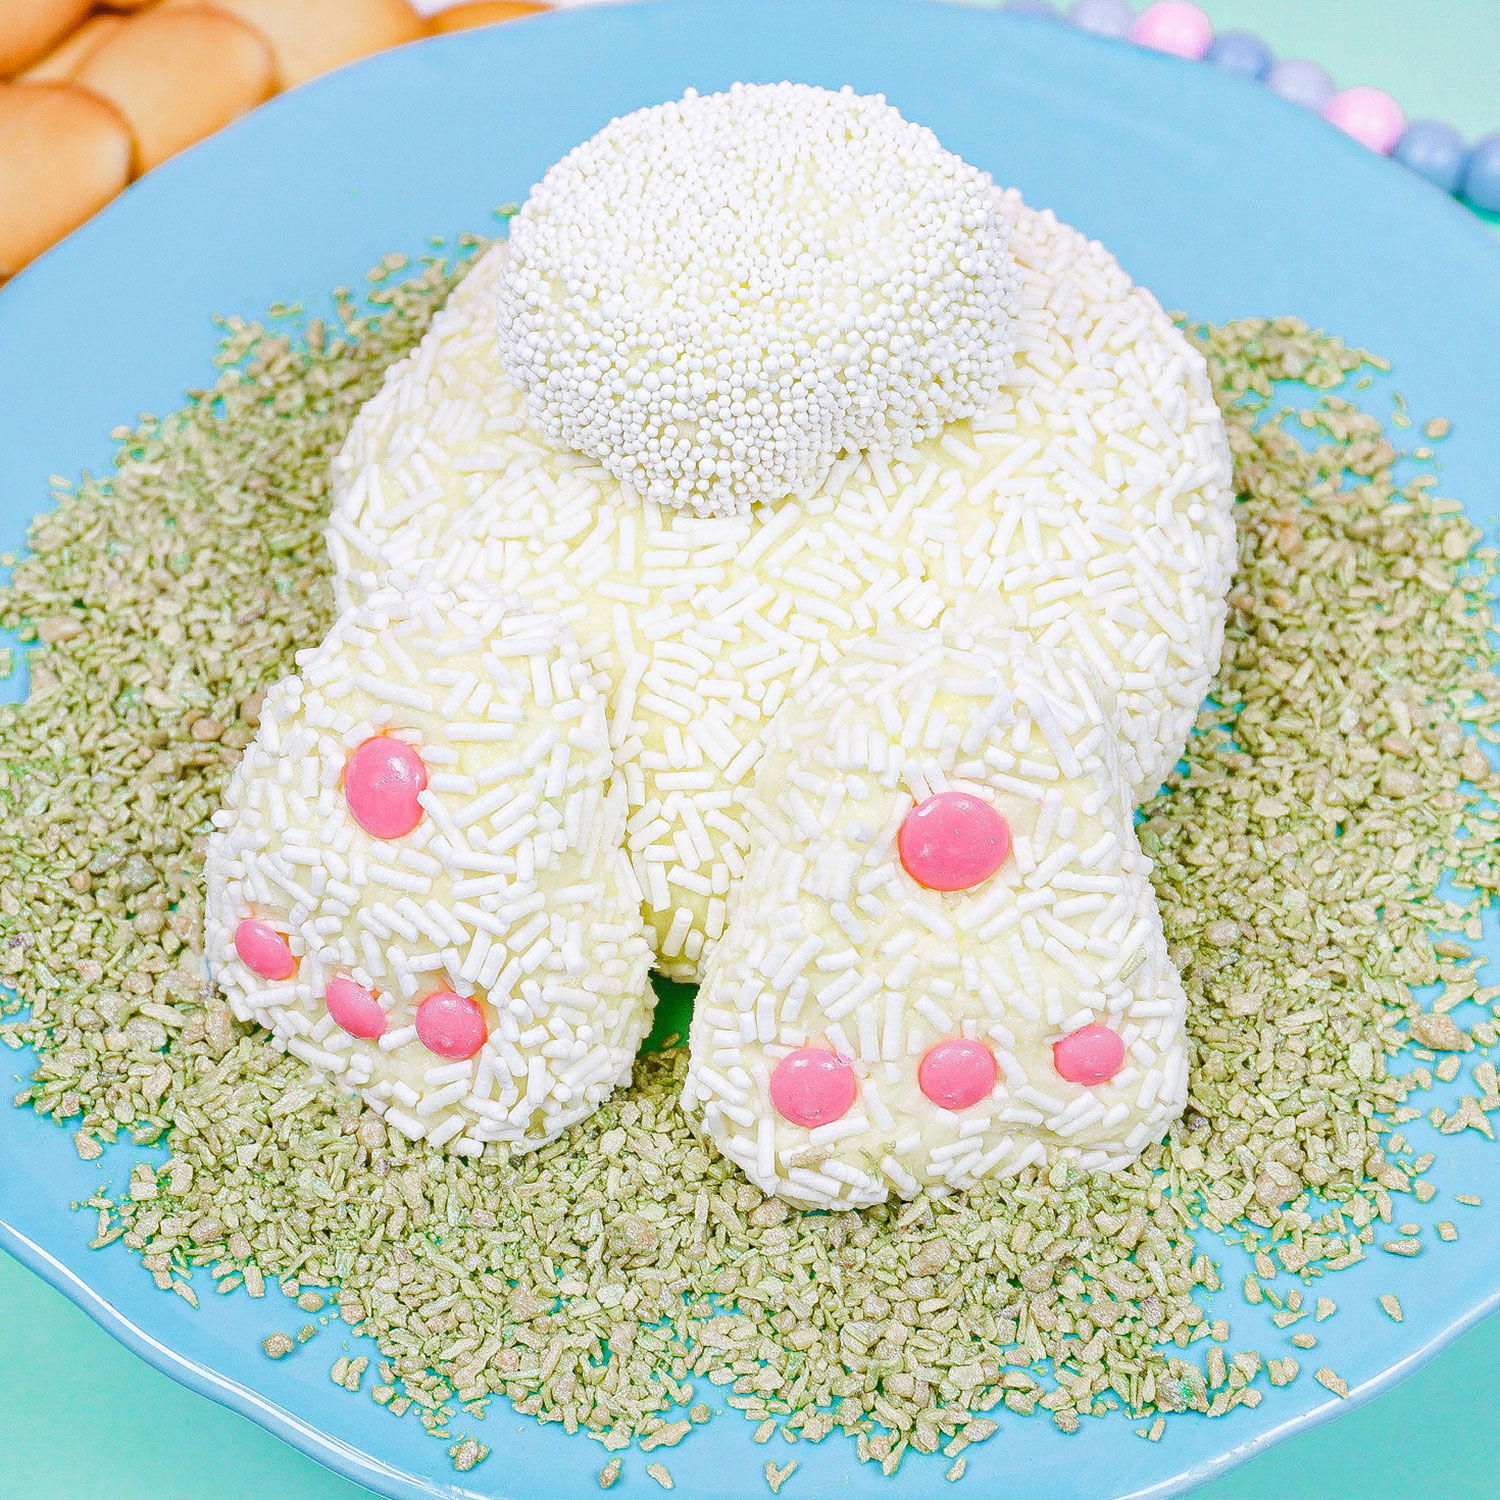 Bunny Bum Shaped Cheeseball for Easter